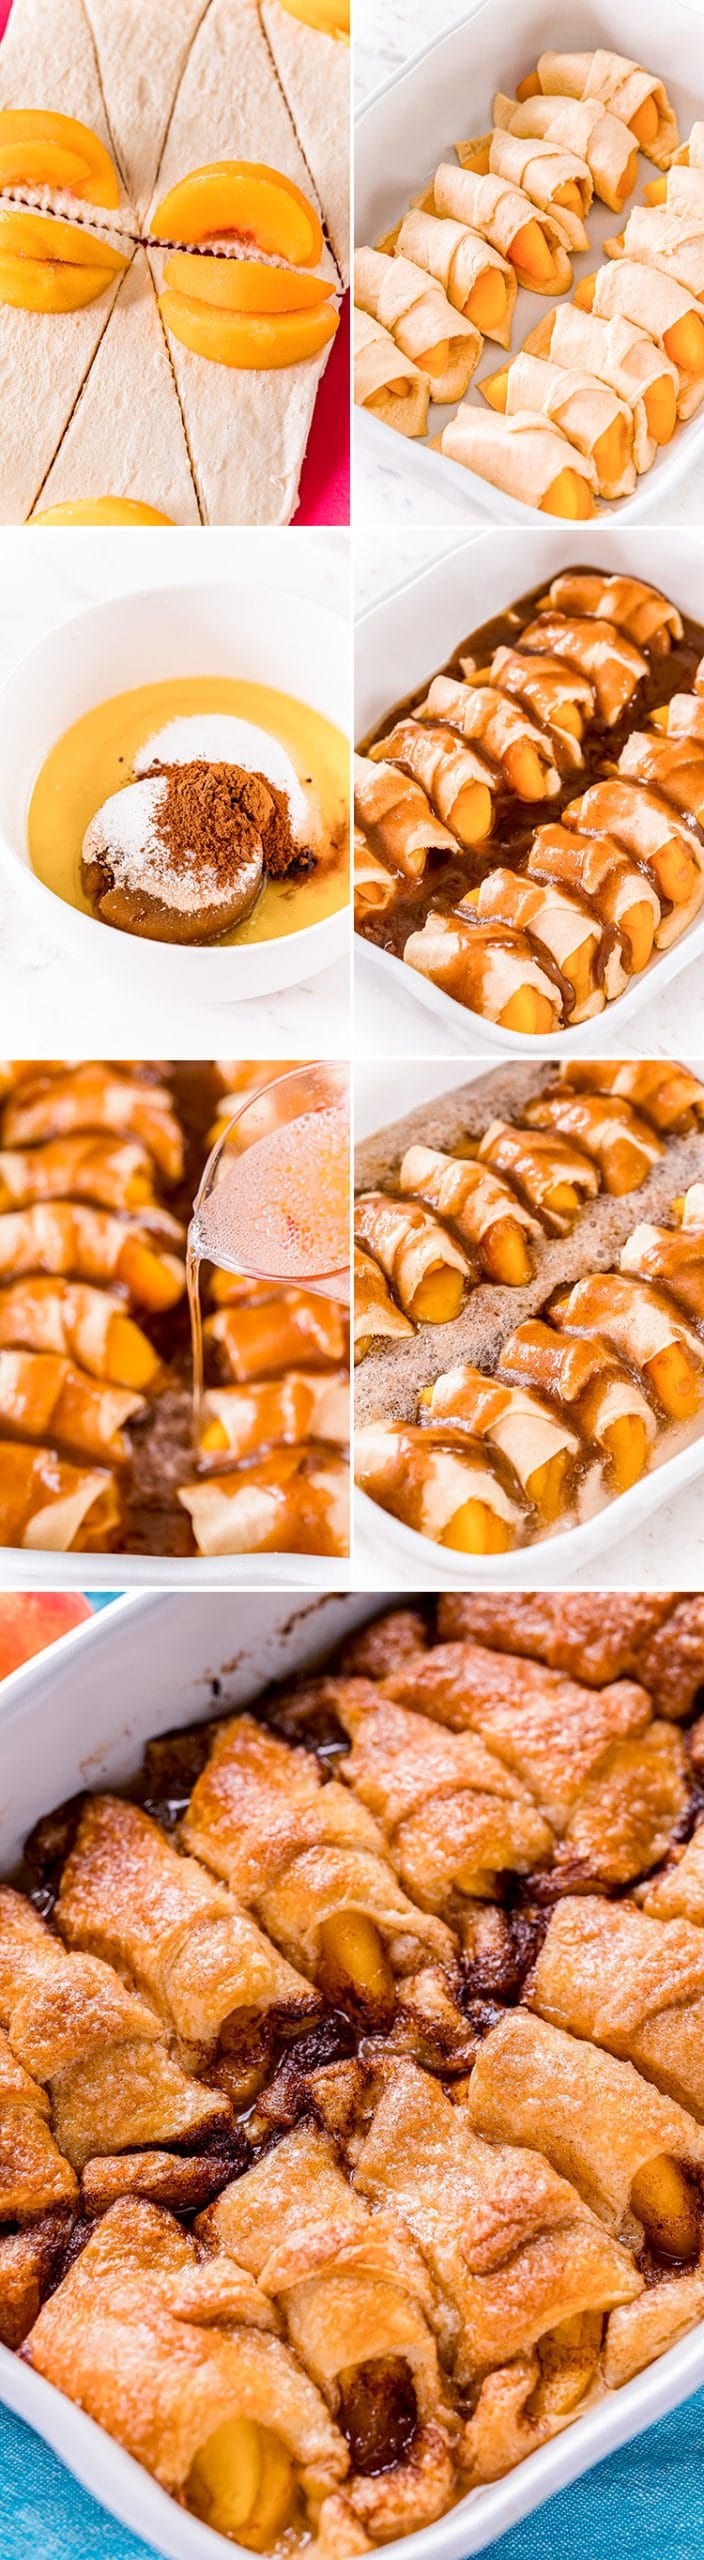 Step by step photo collages on how to make peach dumplings